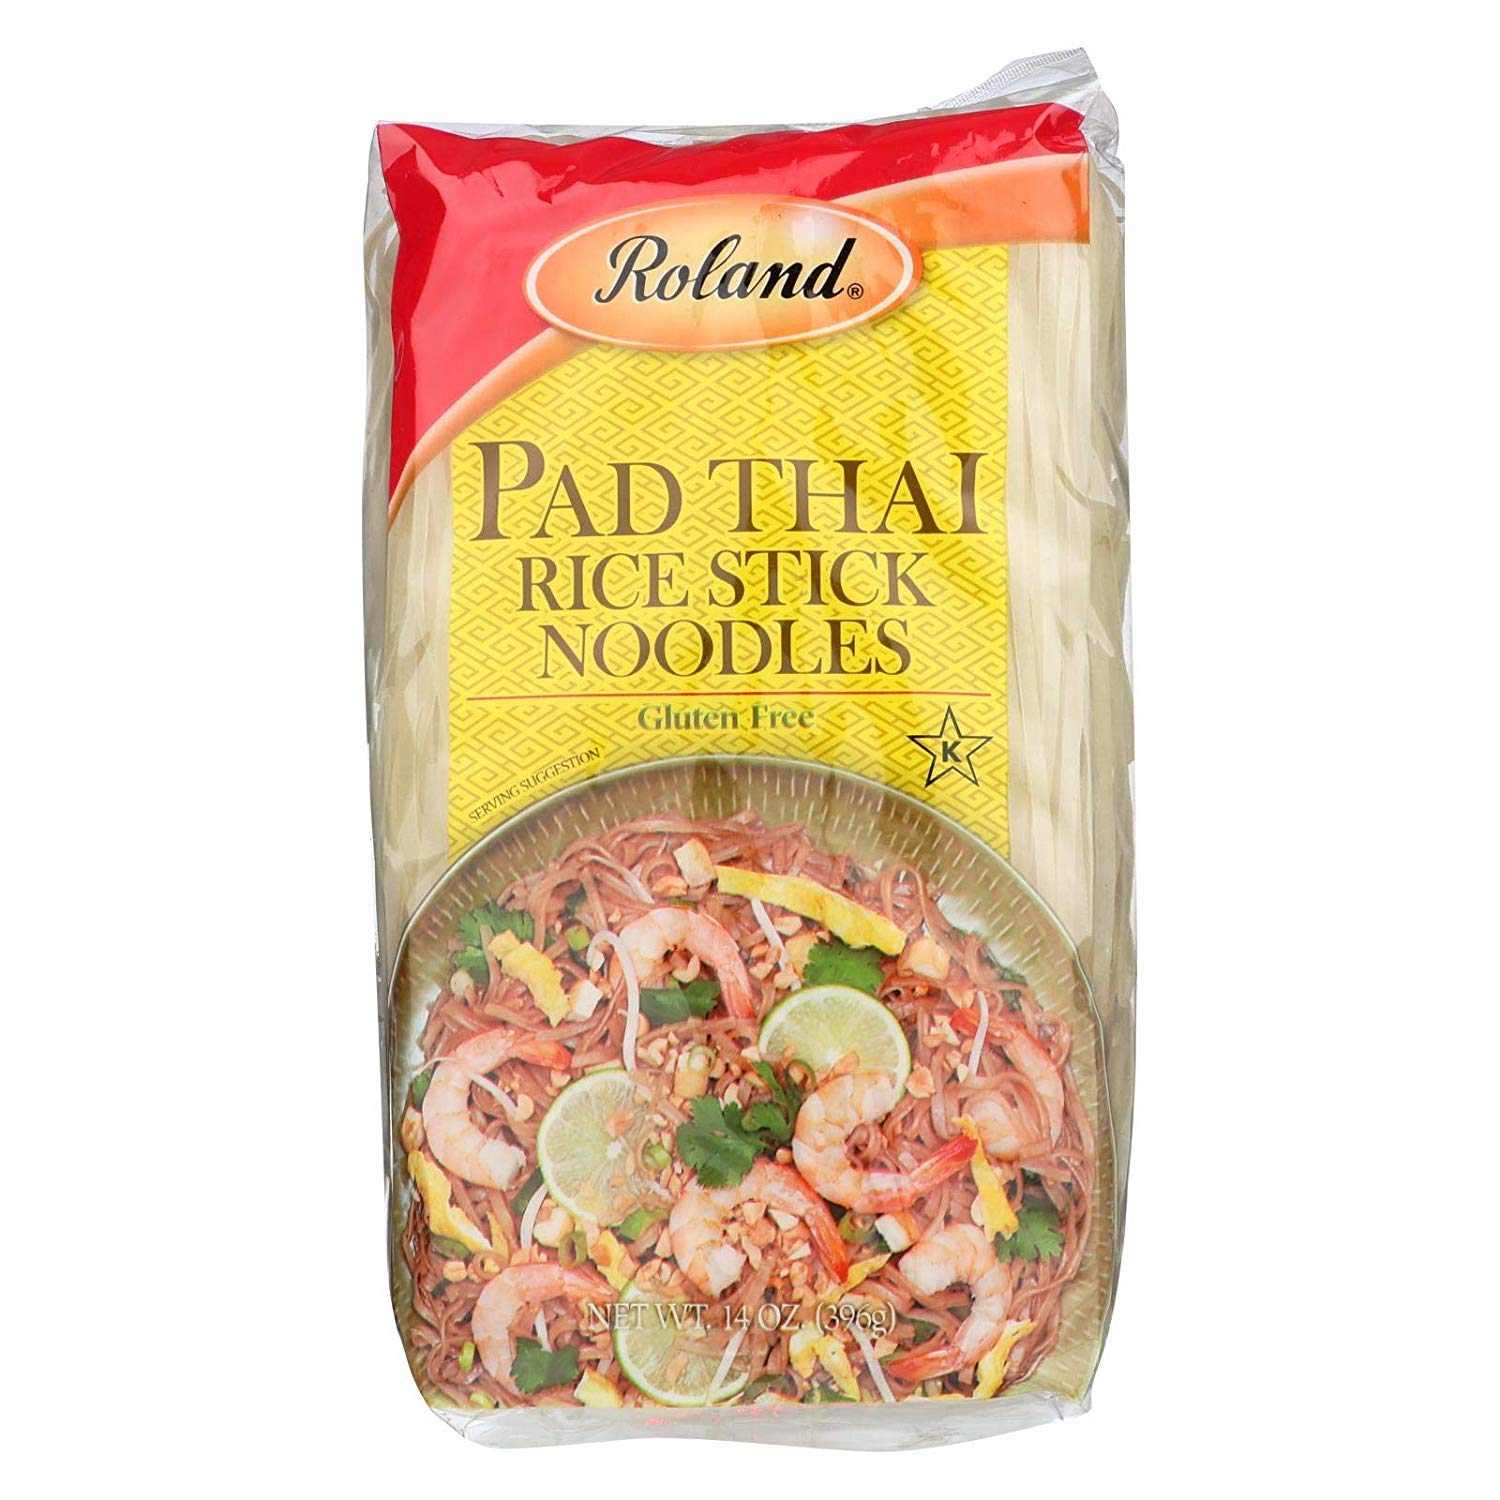 Roland Pad Thai Rice Stick Noodles Package 14 OZ (Pack of 3) by Roland